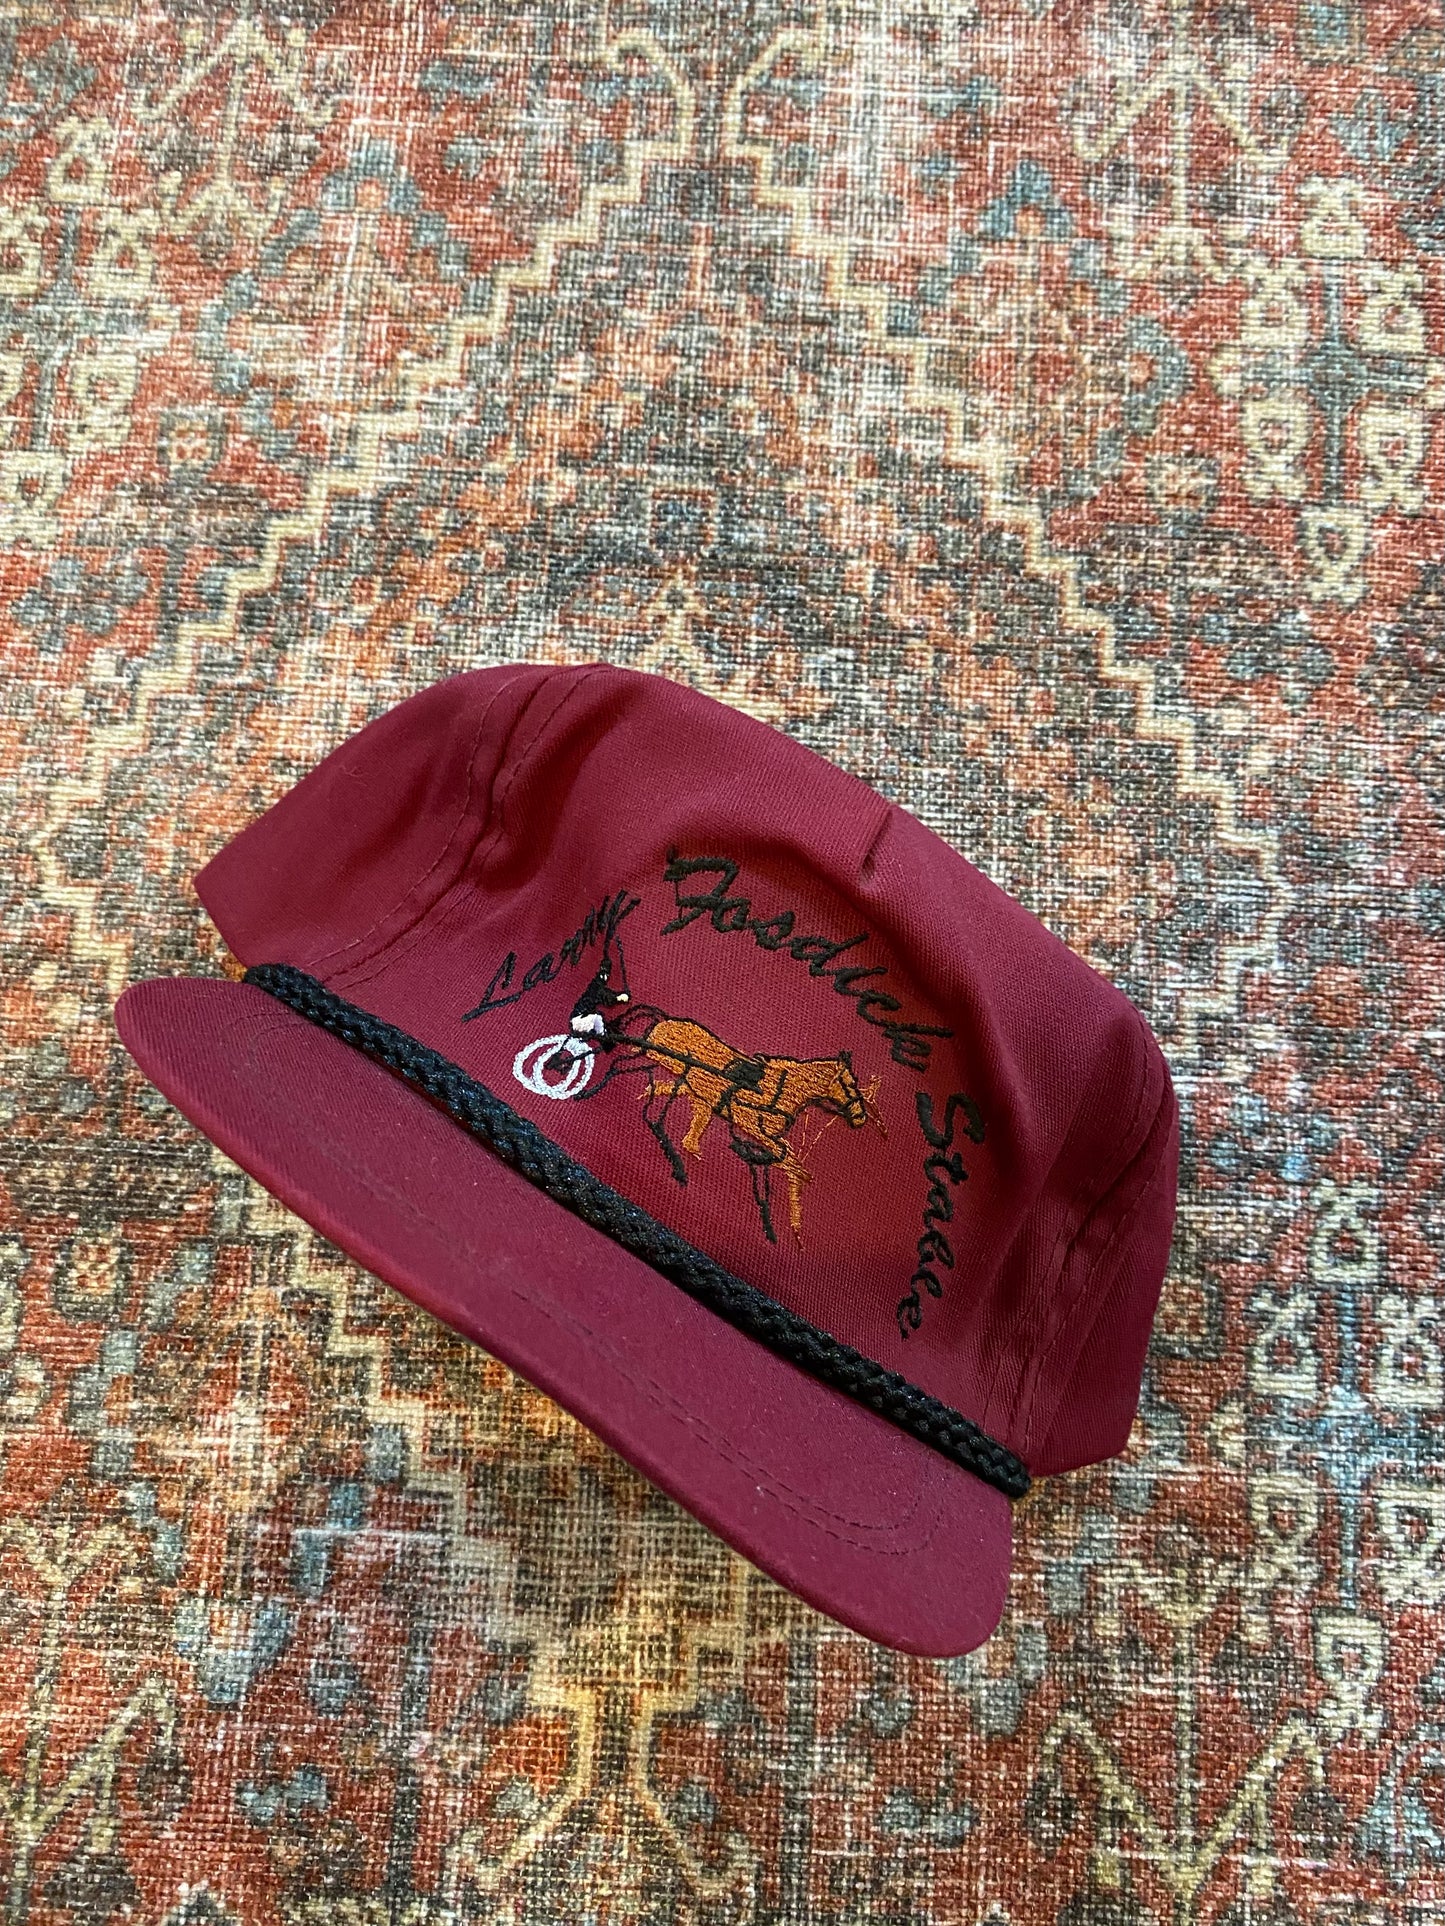 Vintage 90s Horse Stable Hat